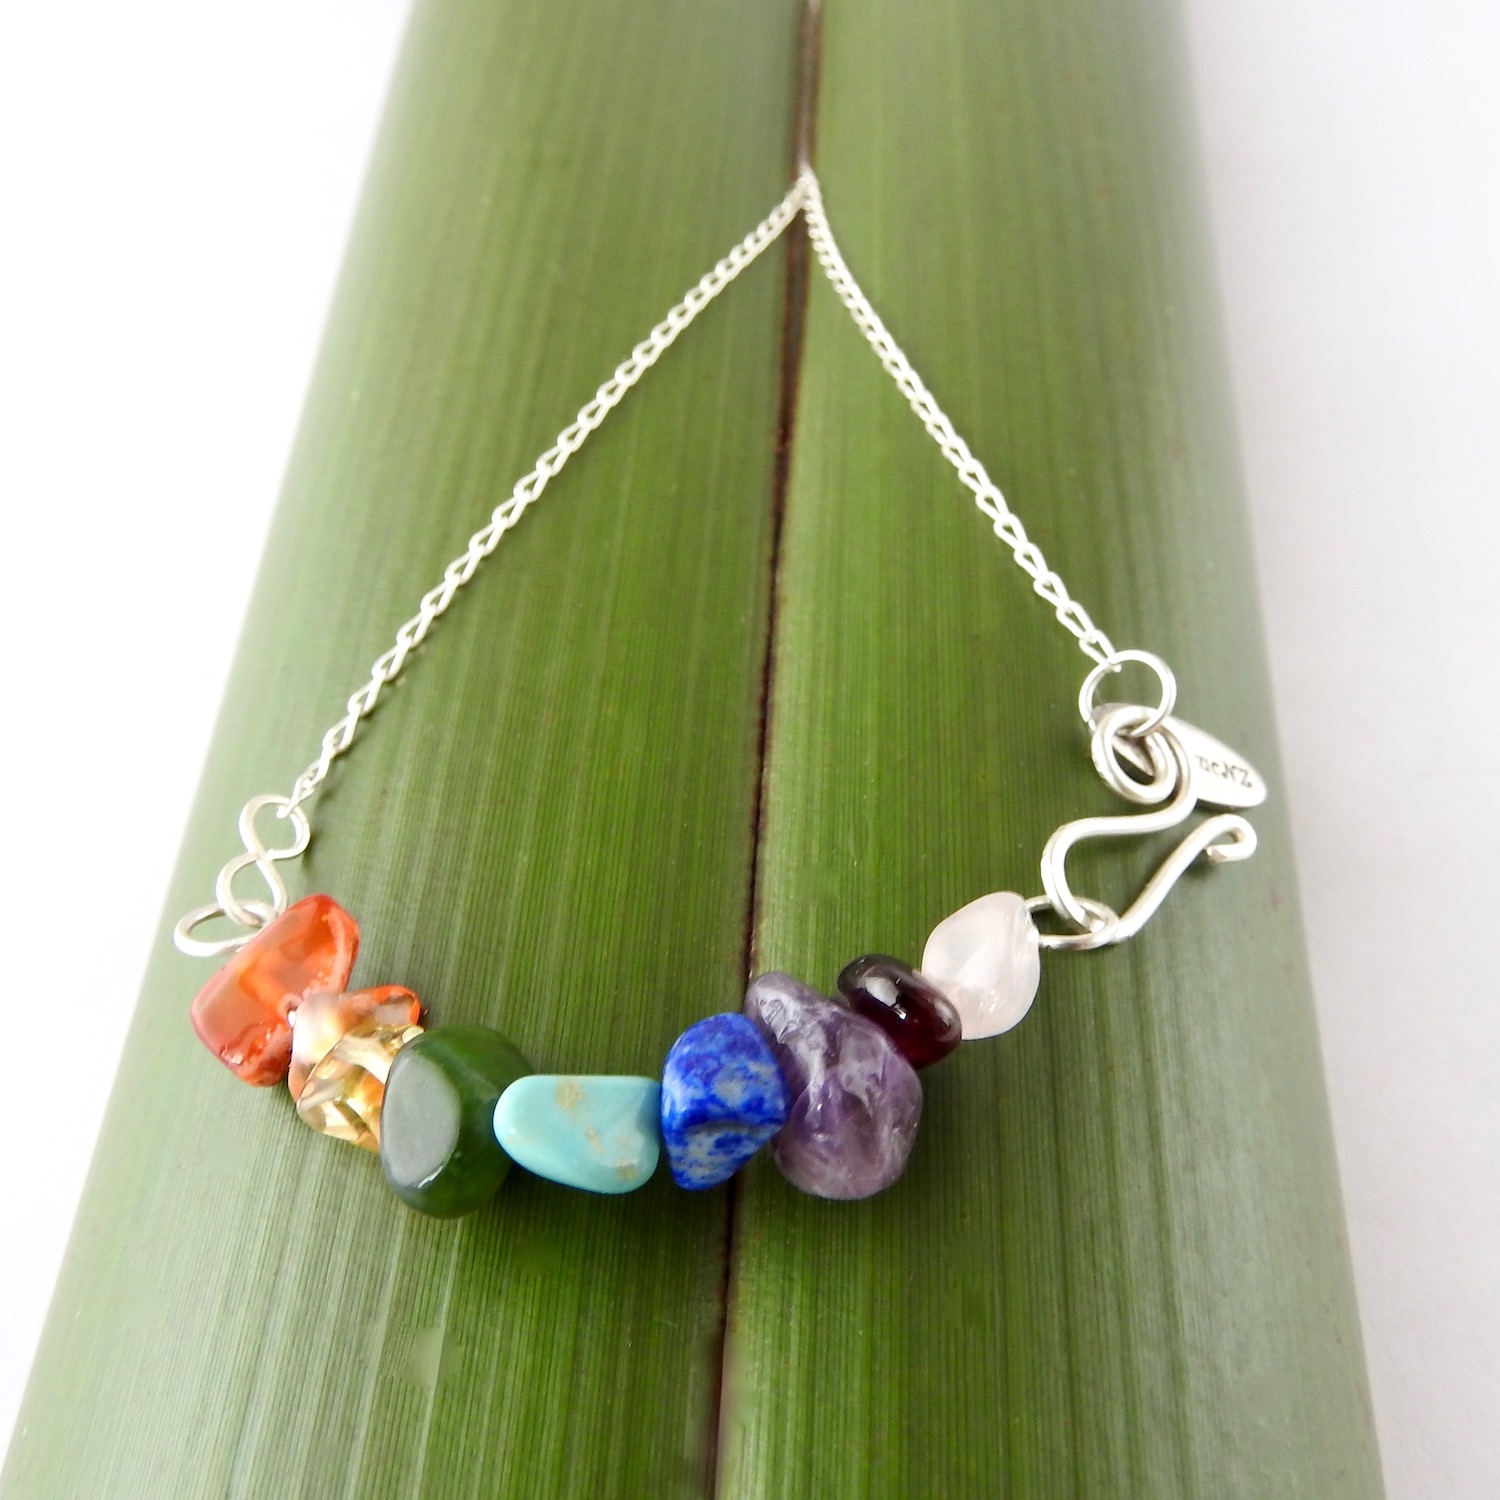 This necklace is handmade with recycled sterling silver and rainbow coloured semi precious stones